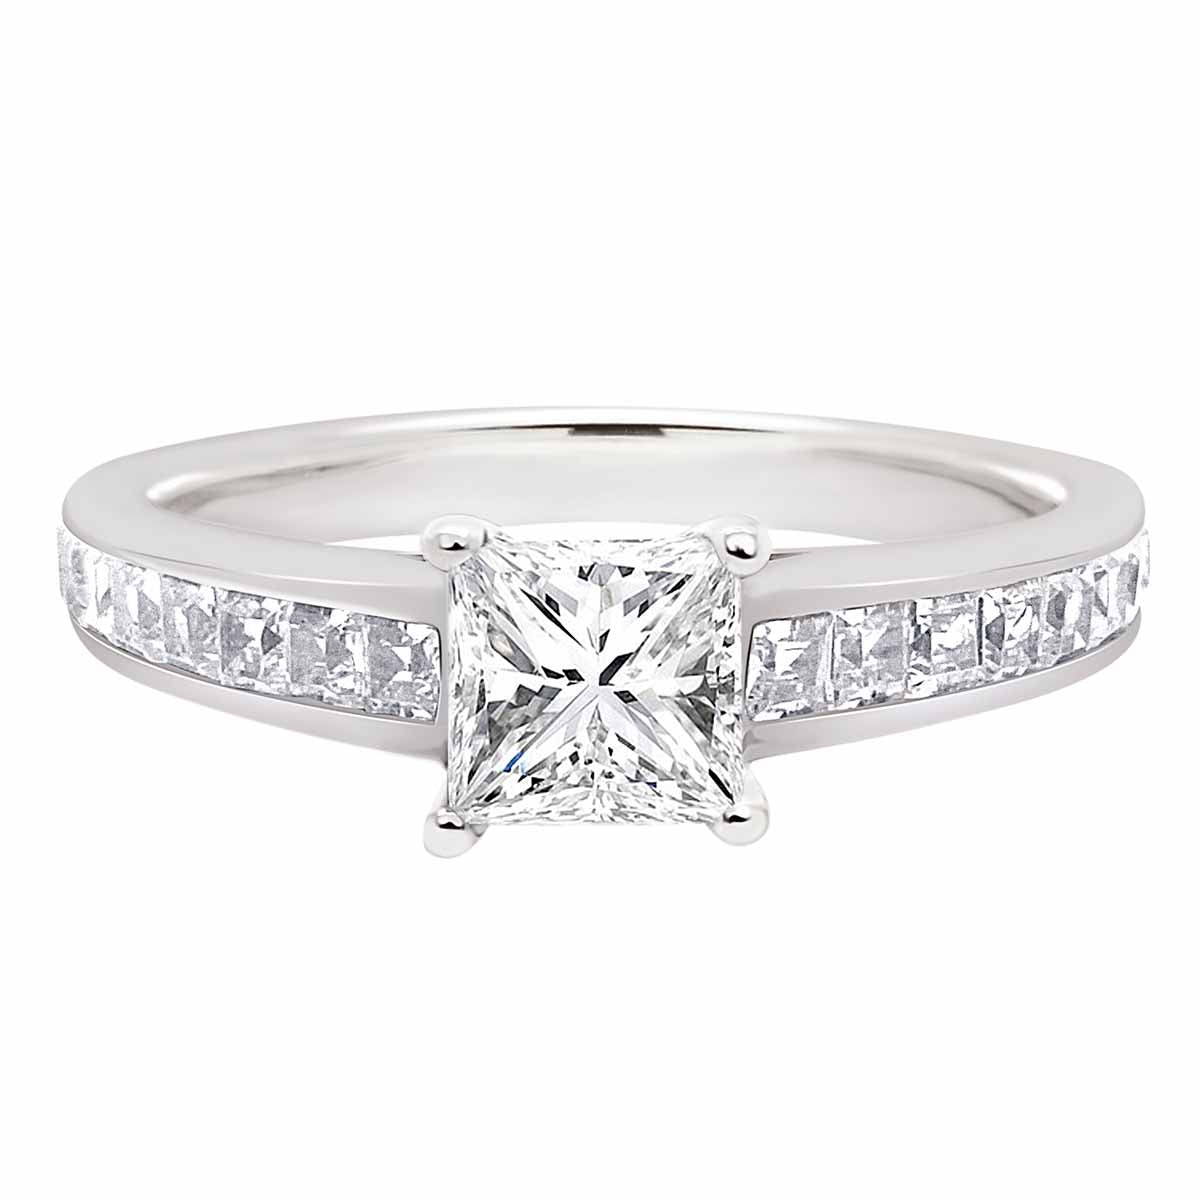 Princess Shape Diamond Ring made from white gold